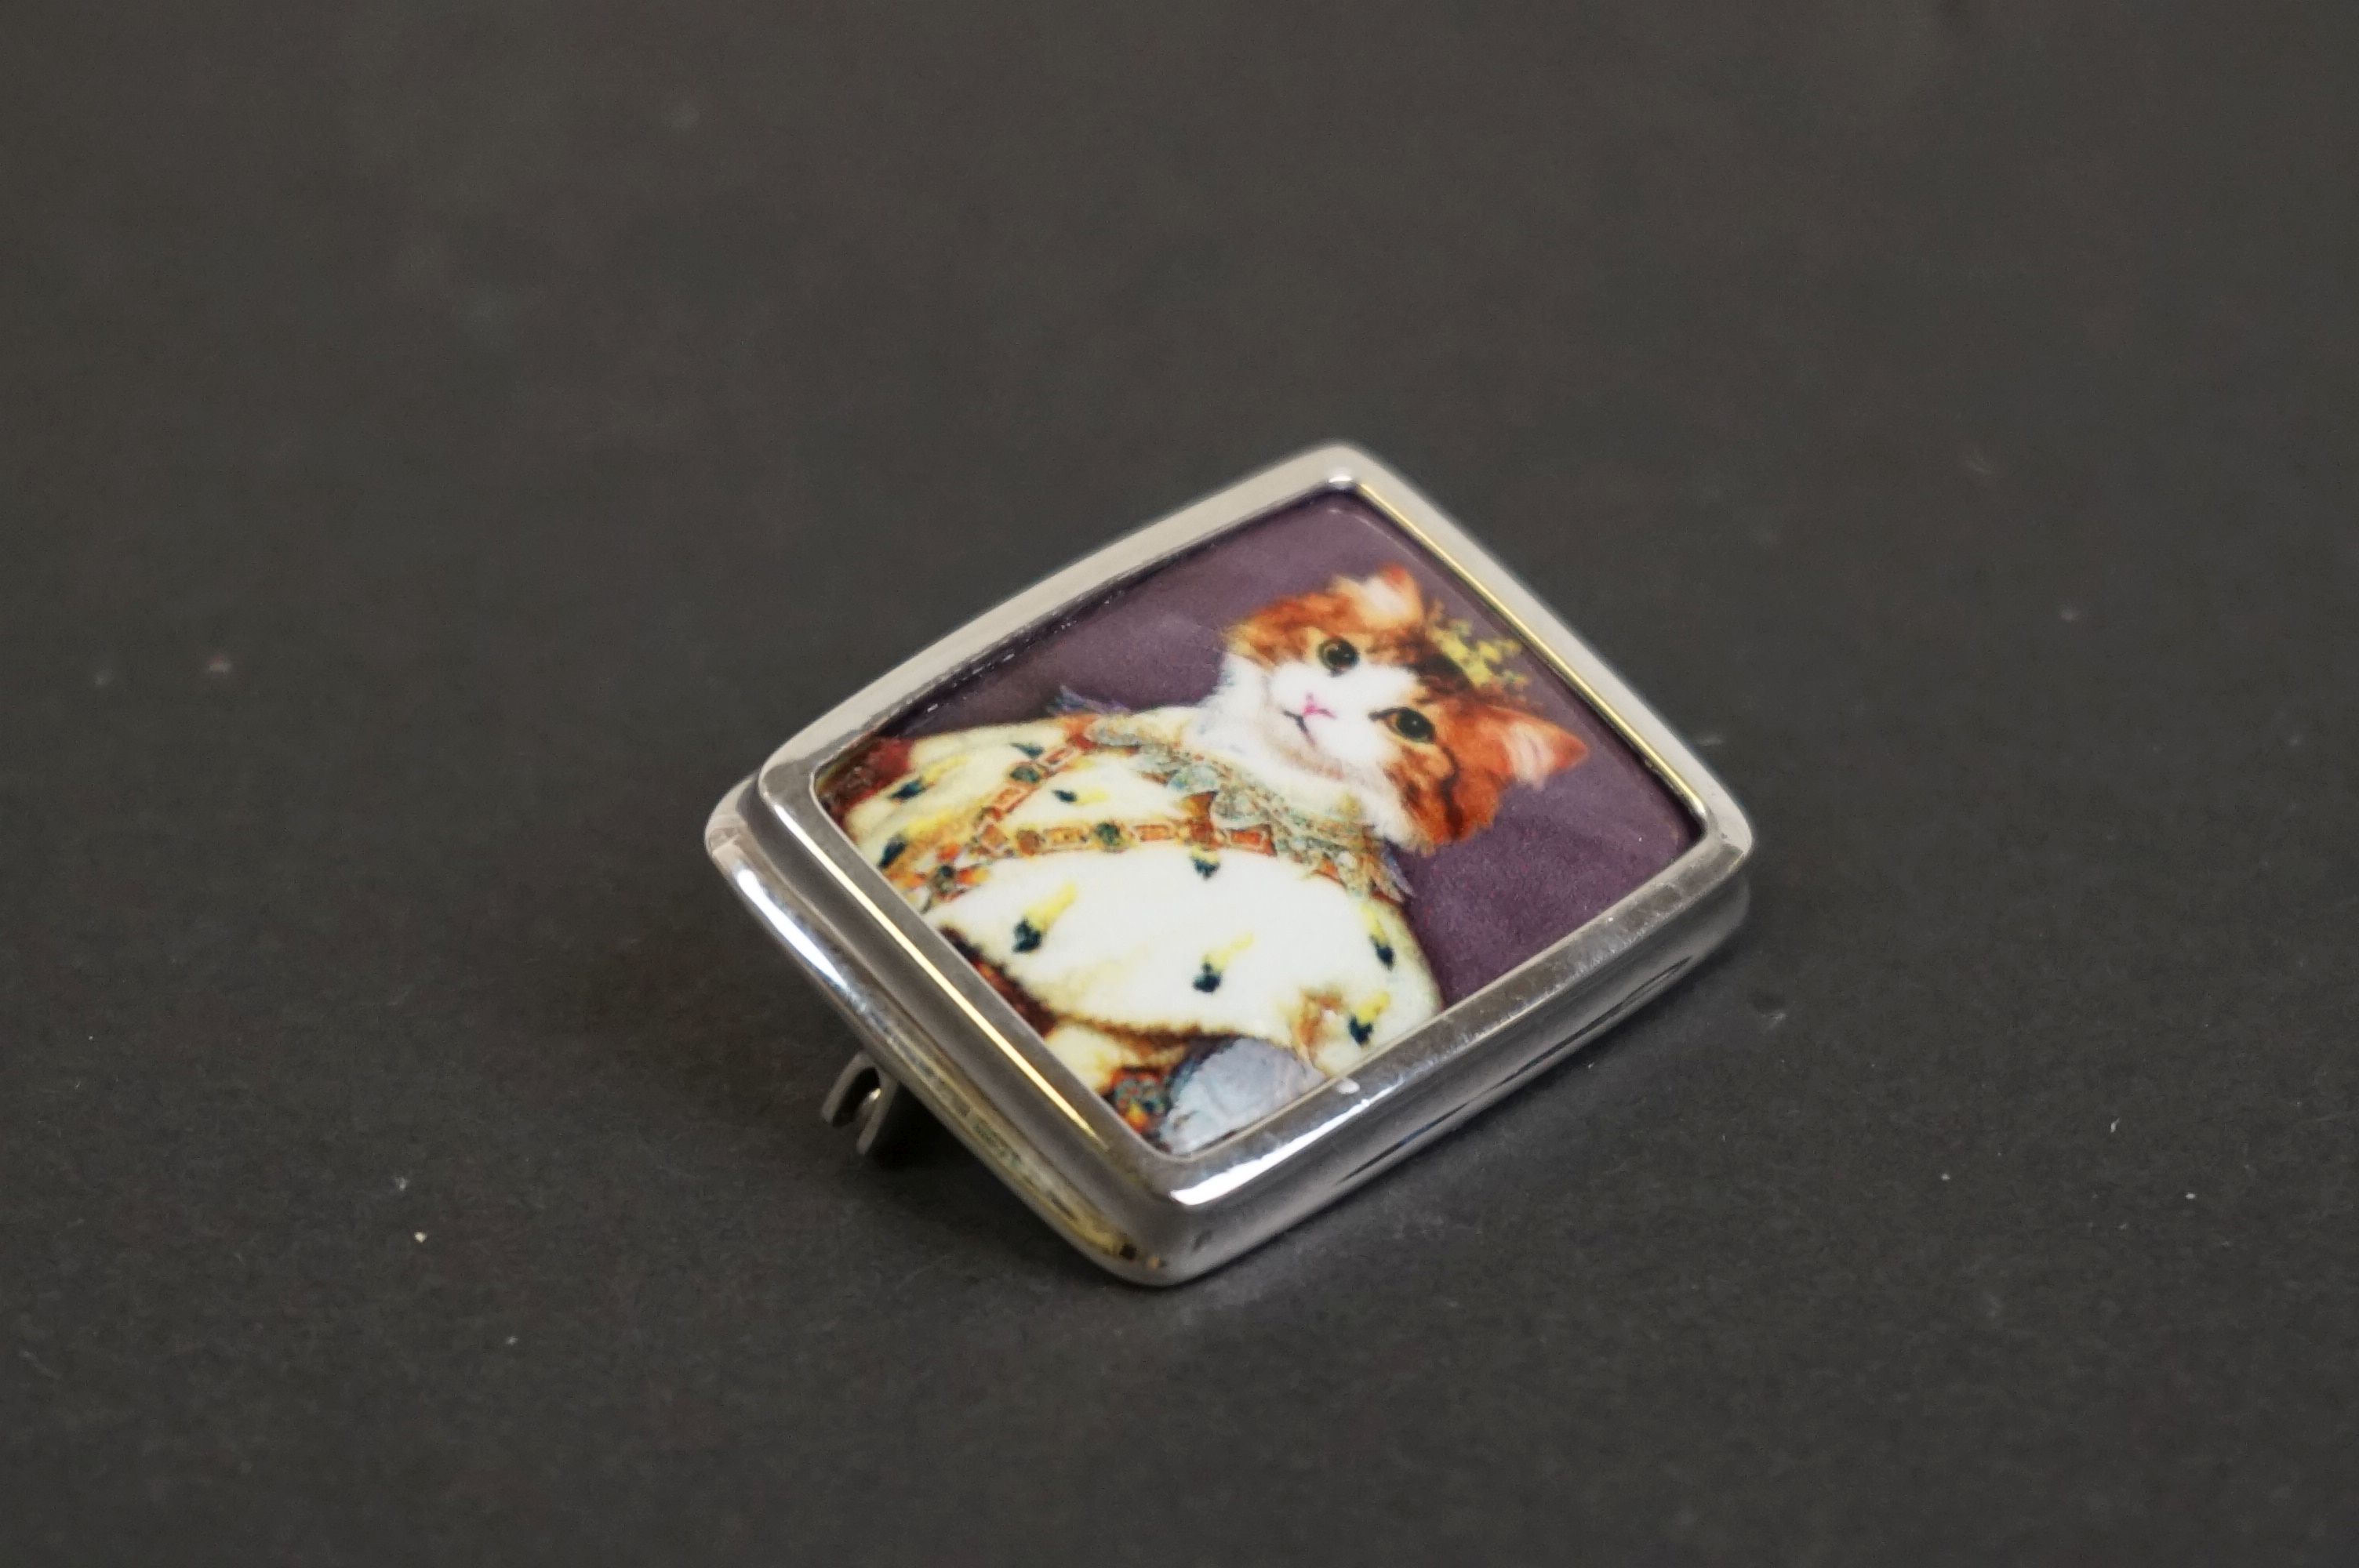 Silver and enamel brooch with pictorial image of a royal cat